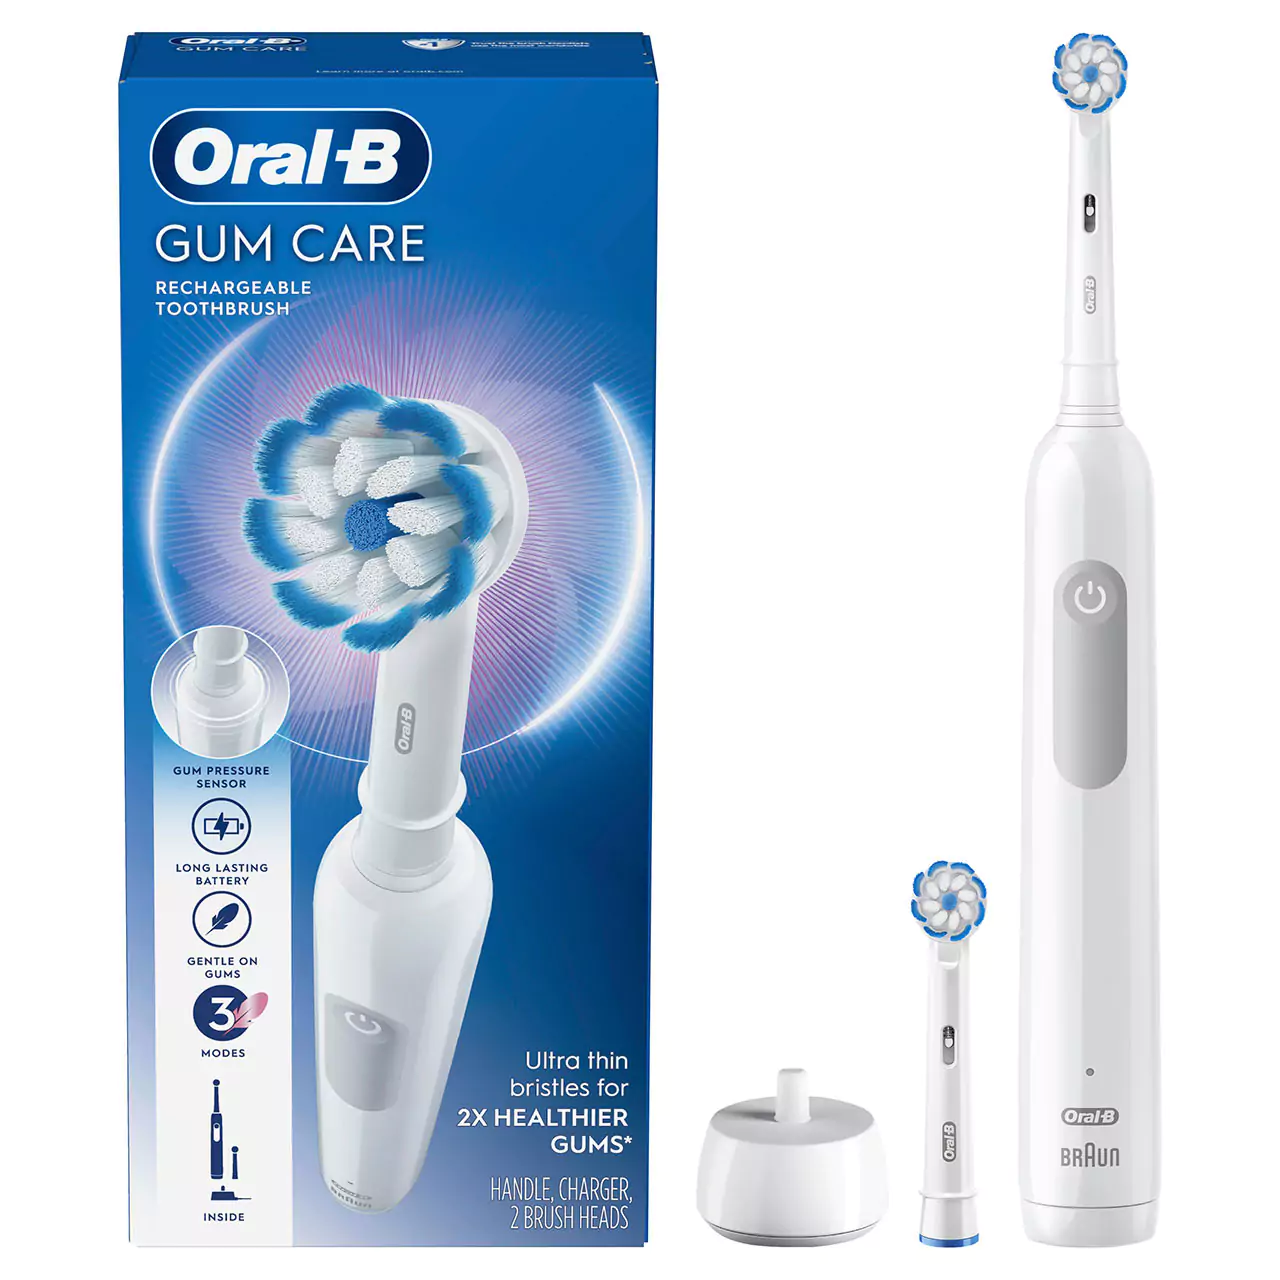 Oral-B Pro 1000 Gum Care Rechargeable Electric Toothbrush